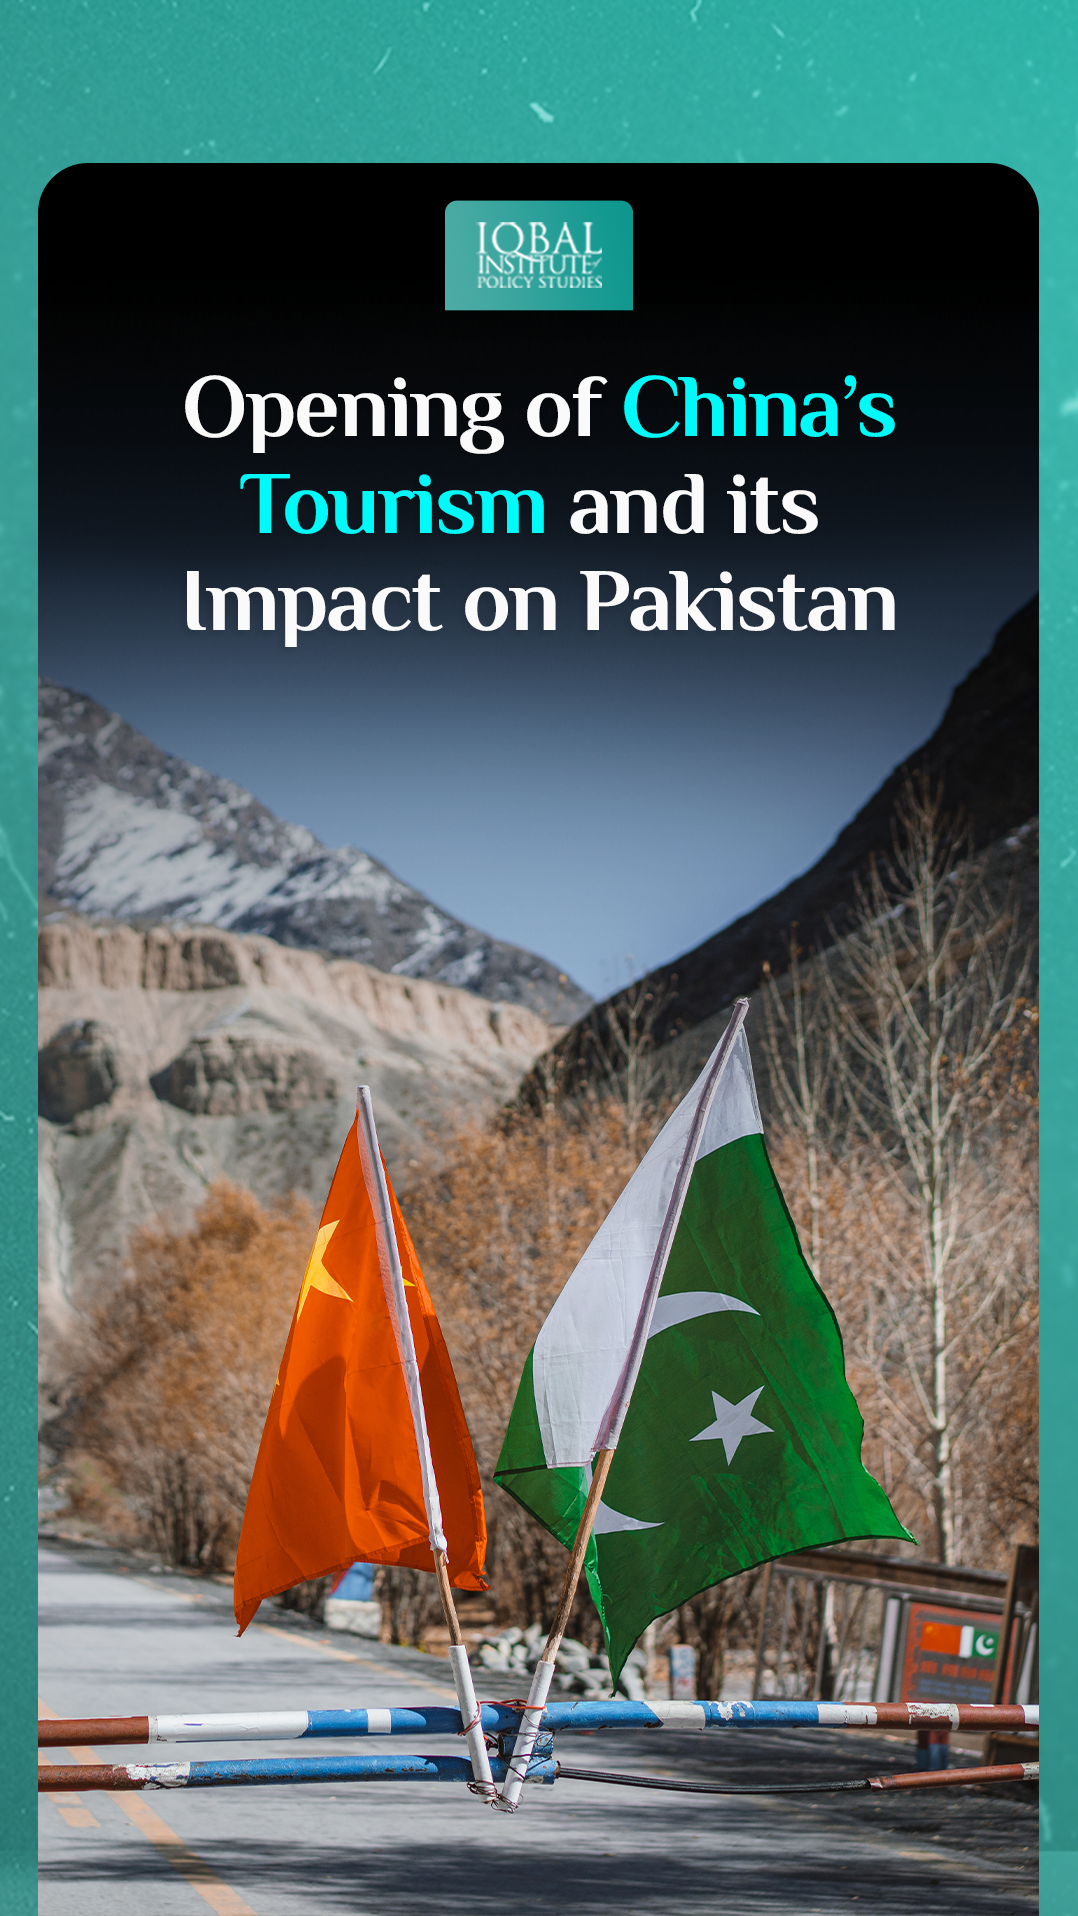 Opening of China's tourism and its impact on Pakistan